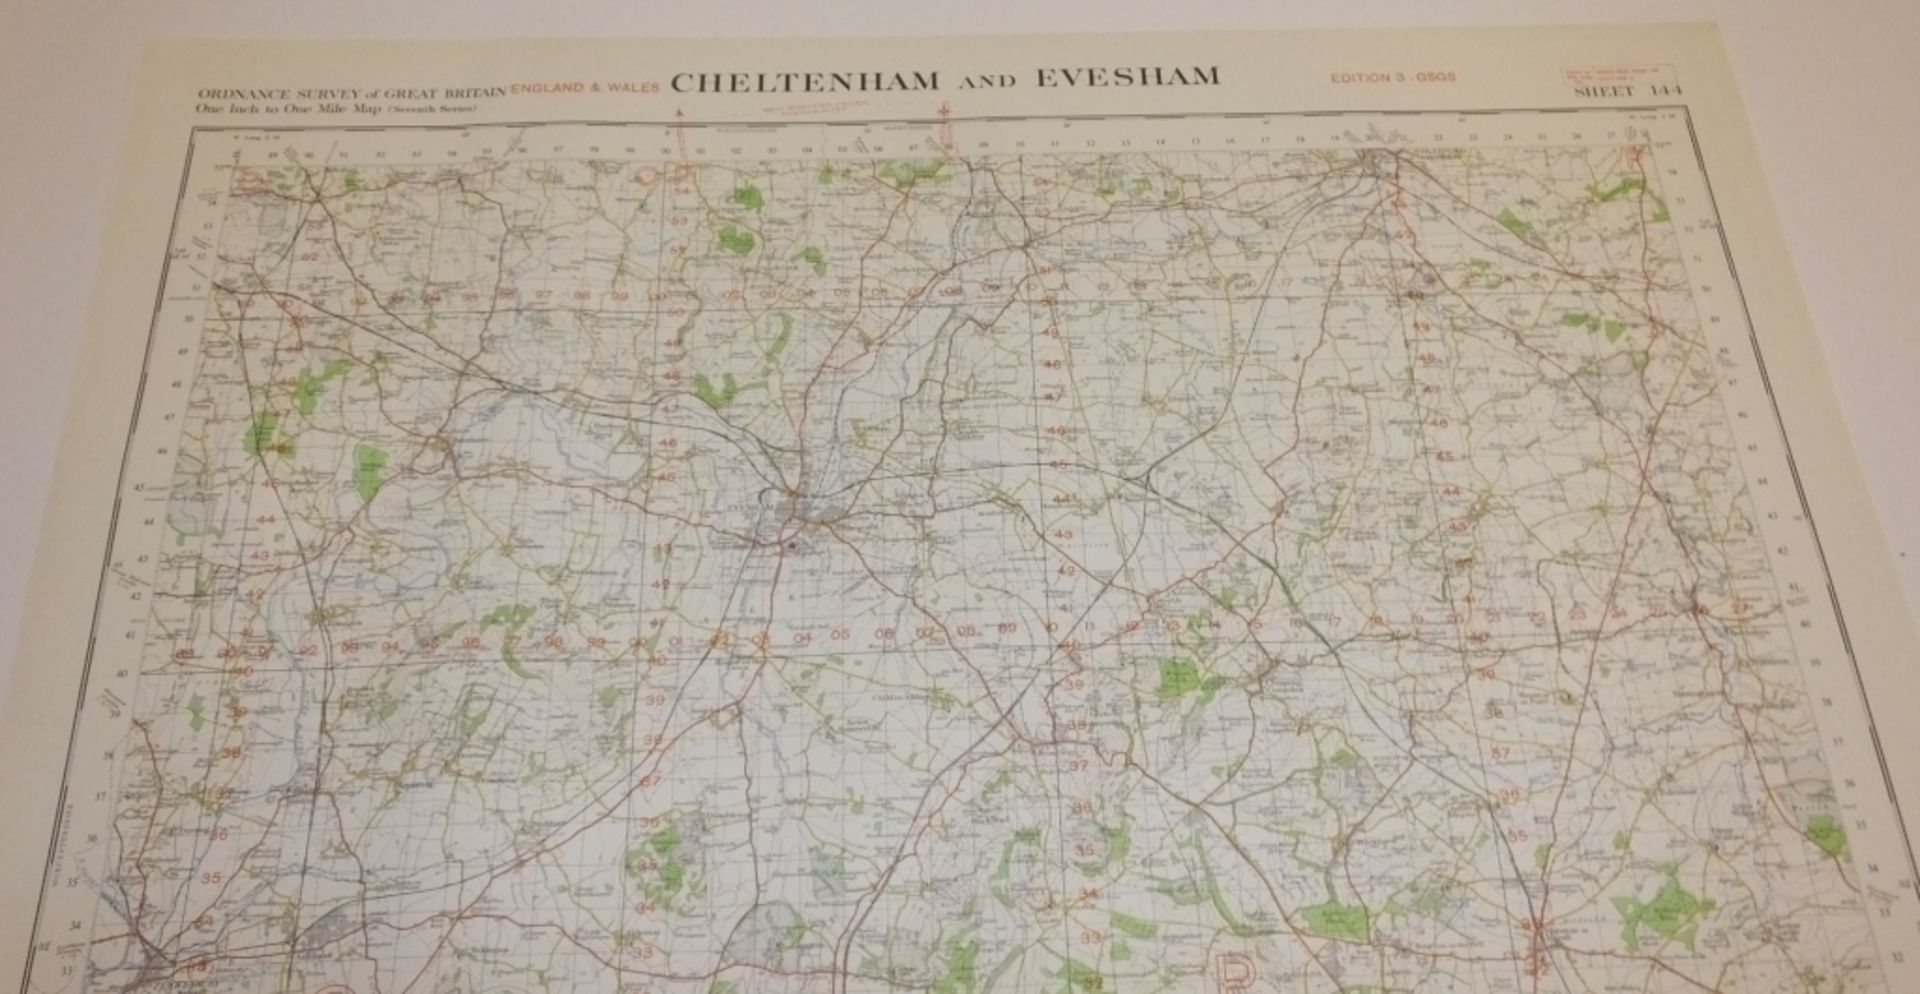 28x ENGLAND & WALES MAP CHELTENHAM EVESHAM 1INCH 1MILE 1955 7TH SERIES 3GSGS SHEET 144 - Image 3 of 5